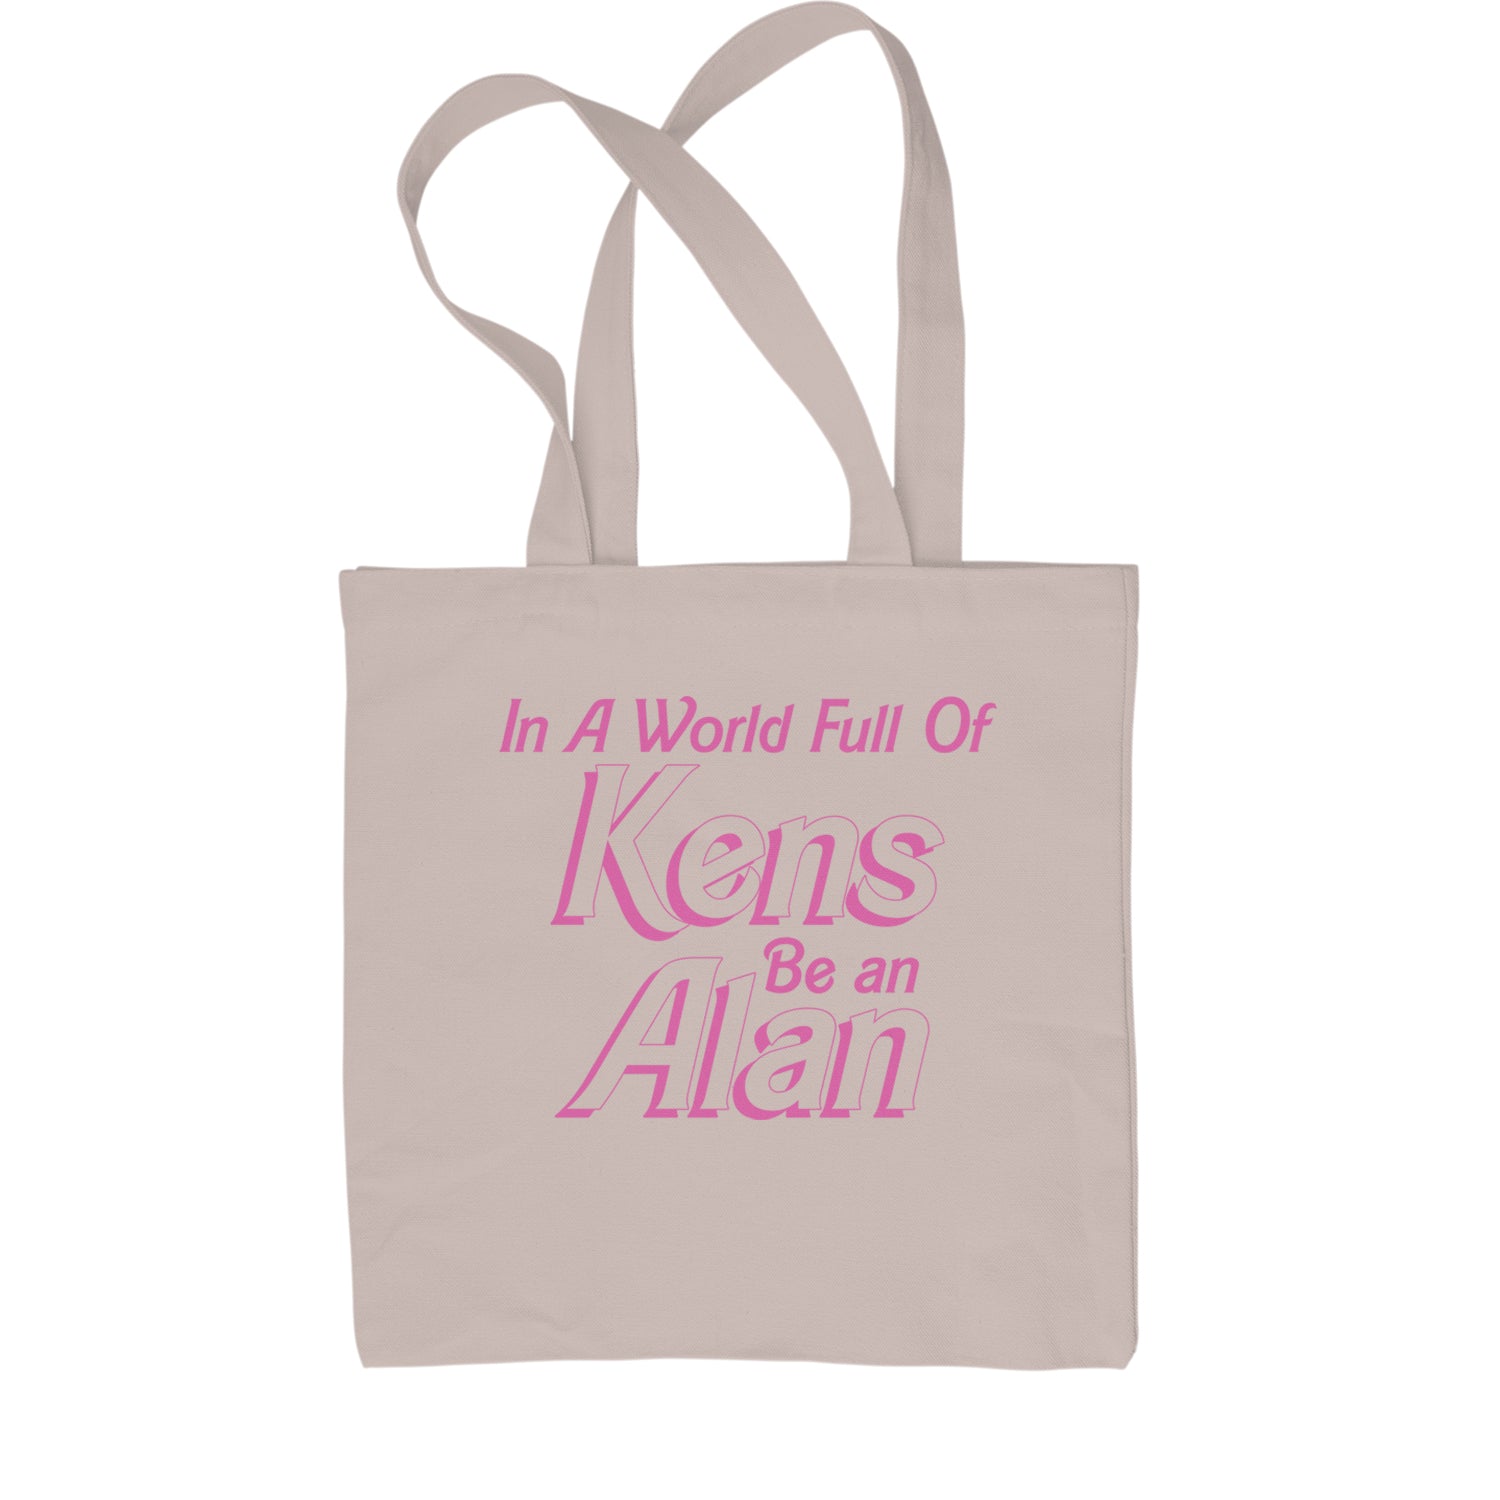 In A World Full Of Kens, Be an Alan Shopping Tote Bag